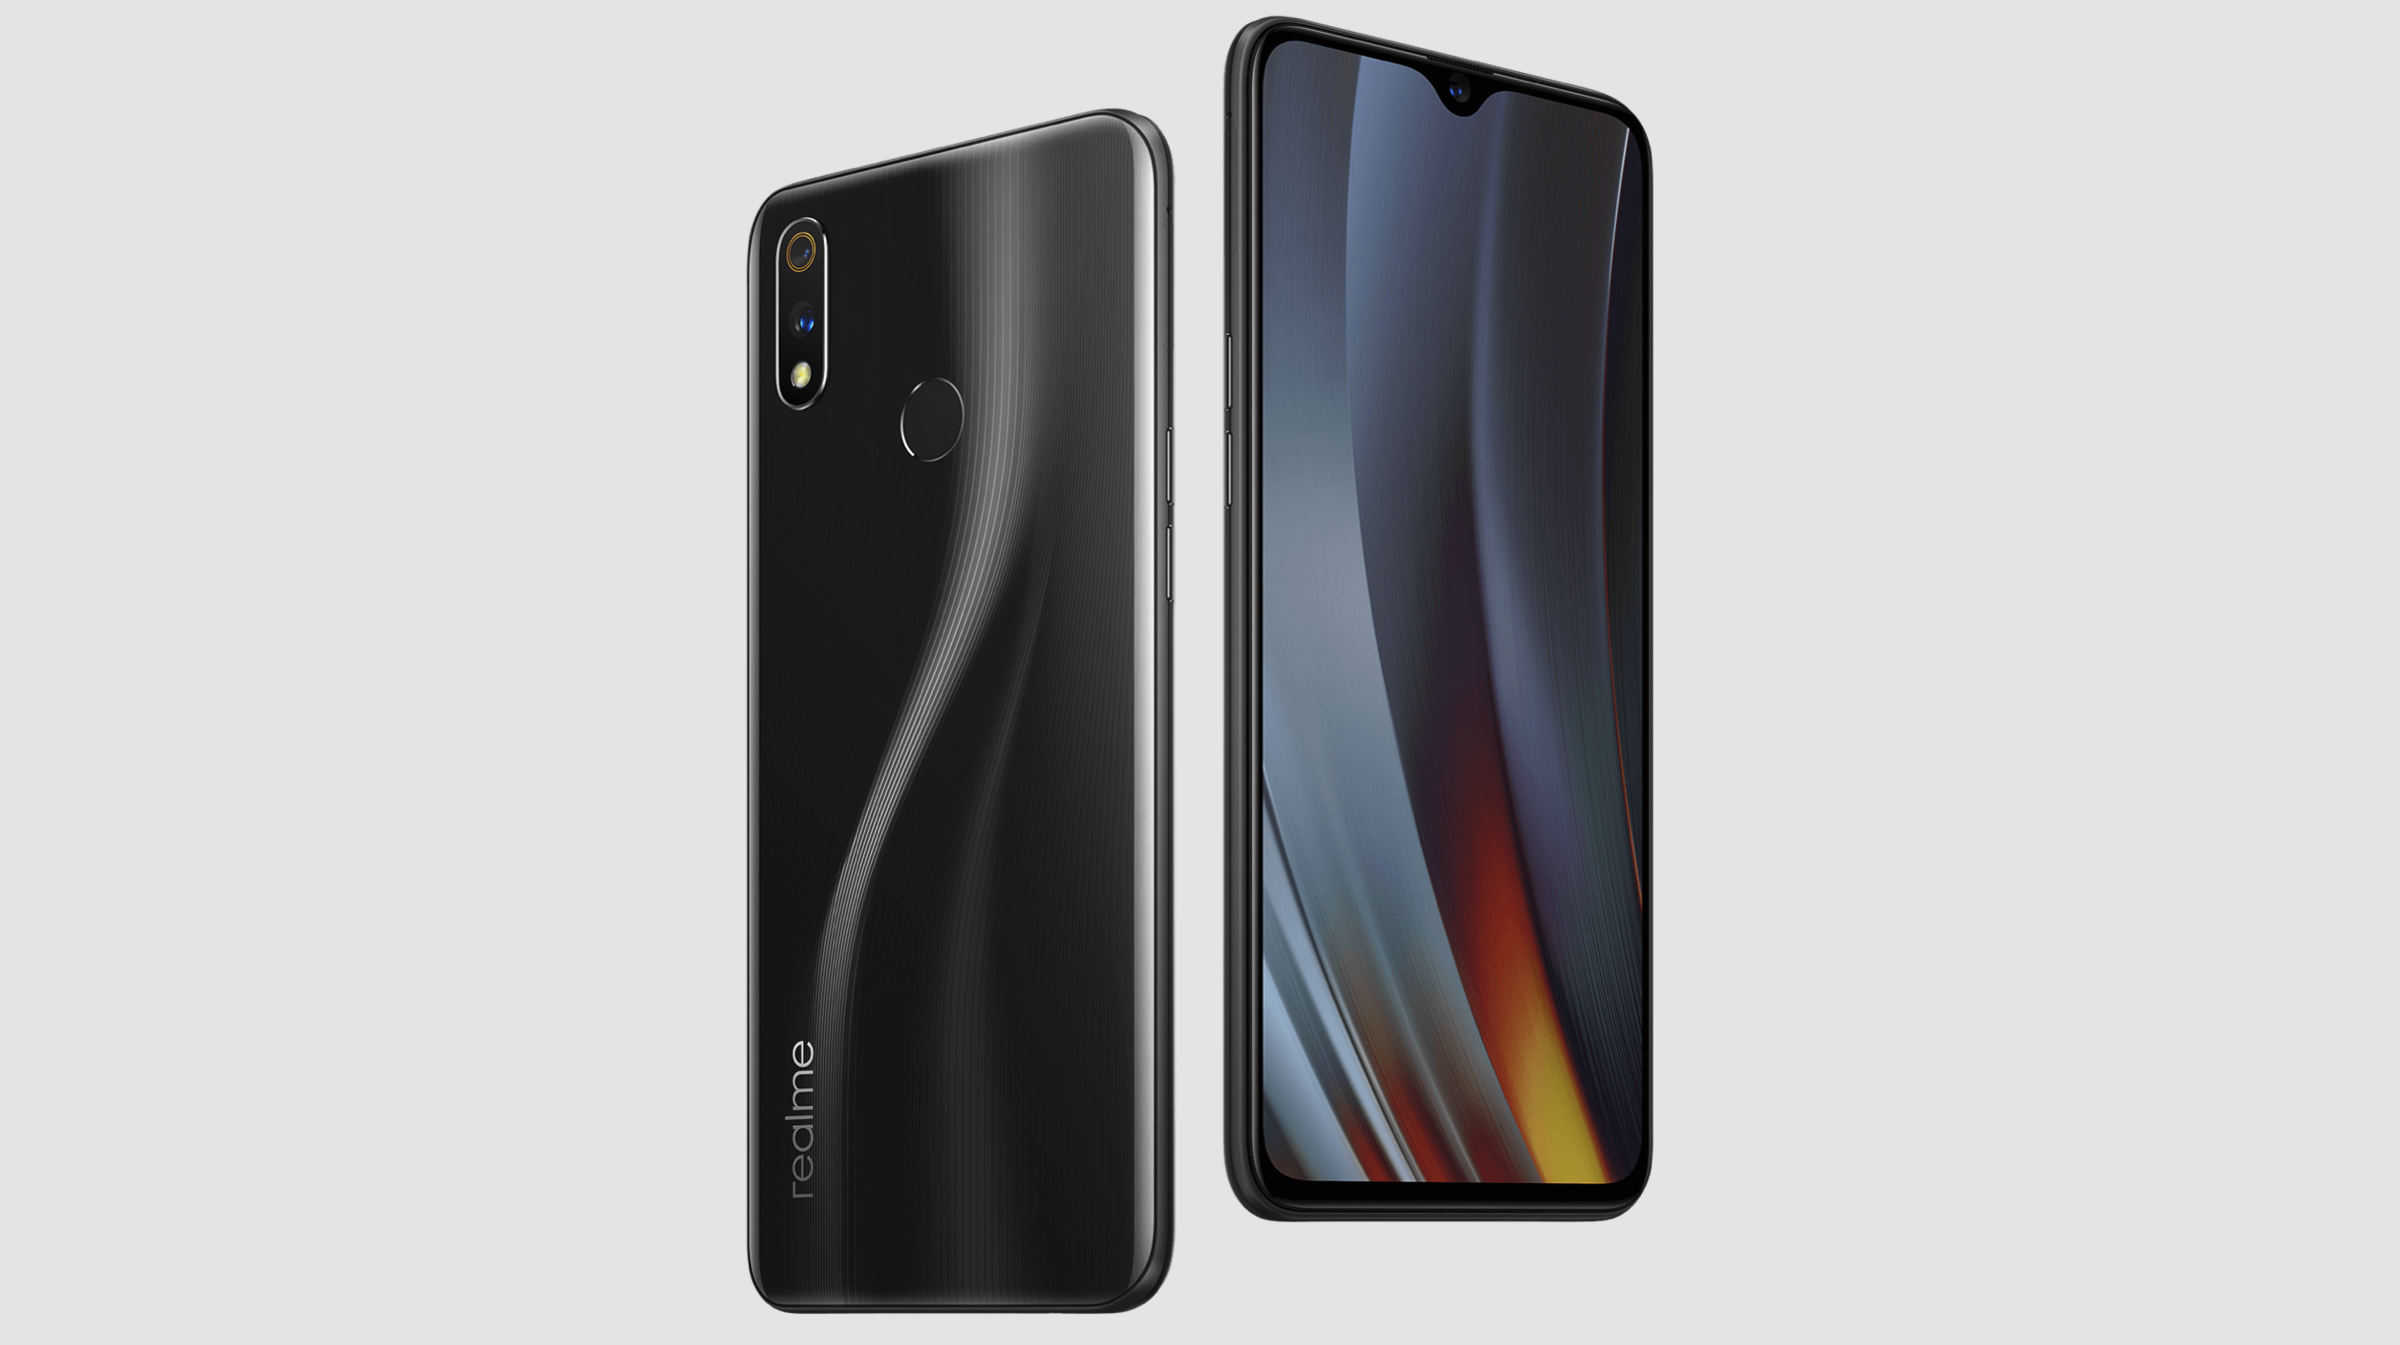 ColorOS of Realme reminds of